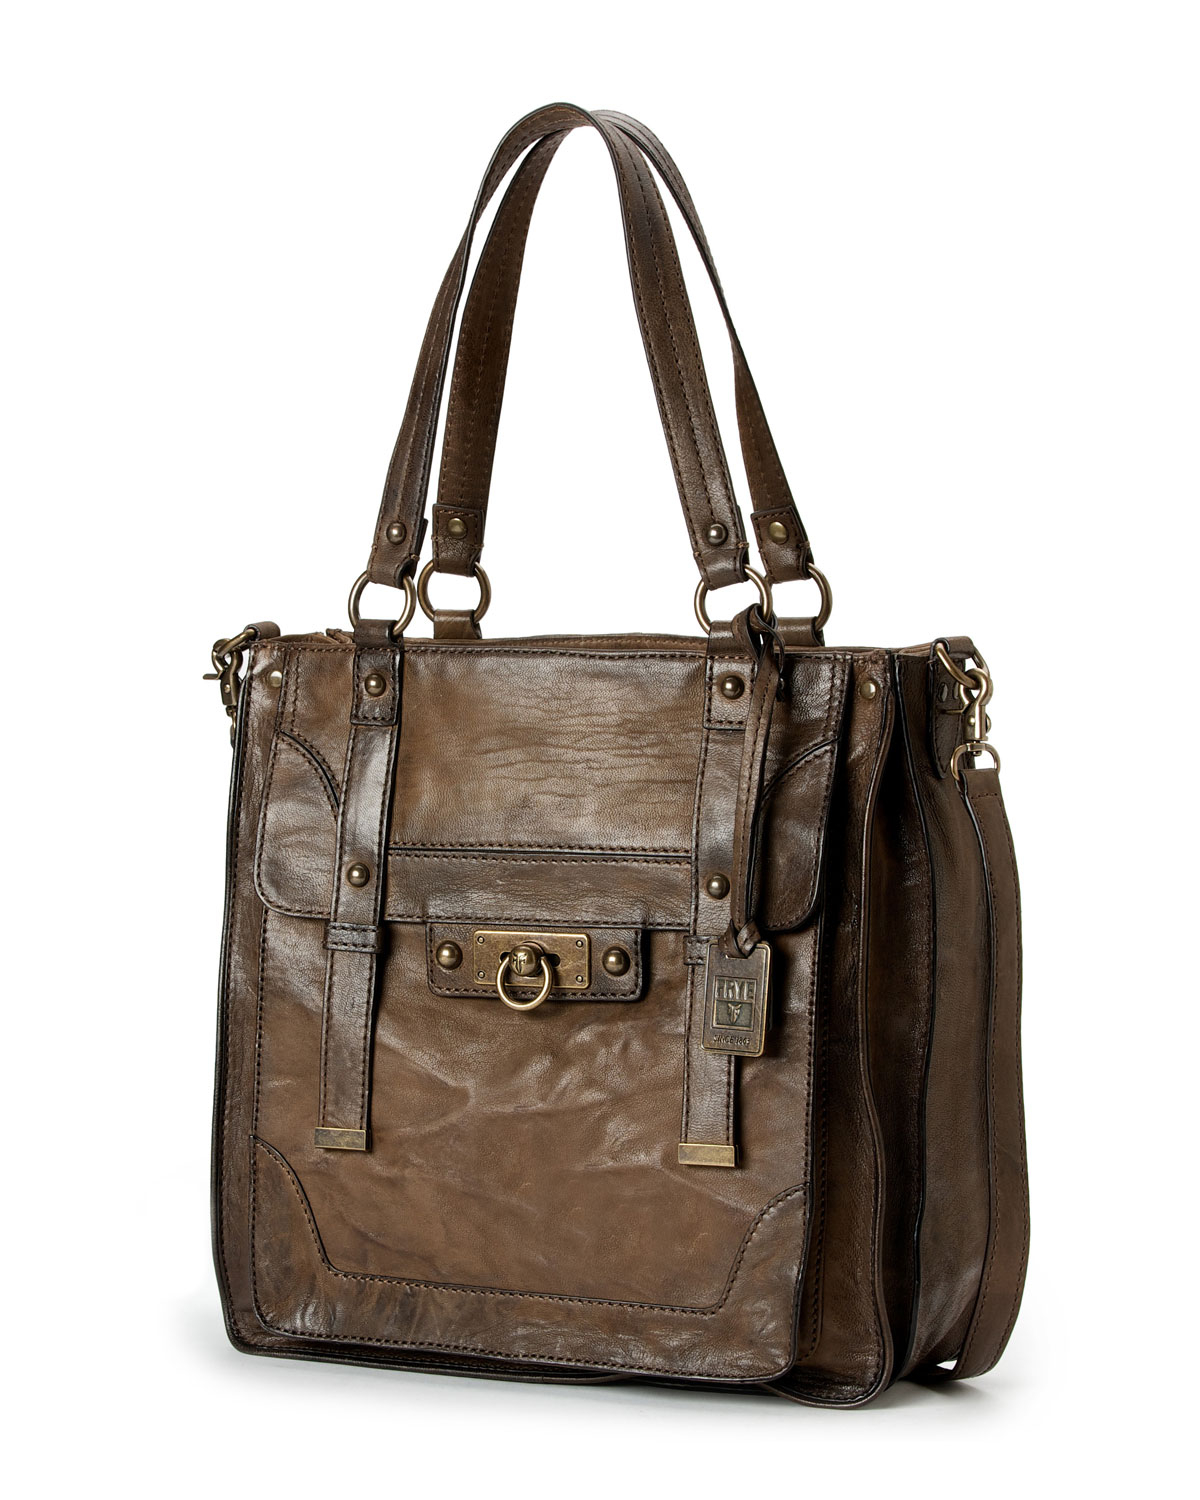 Lyst - Frye Cameron Antiqued Leather Tote Bag Olive in Brown